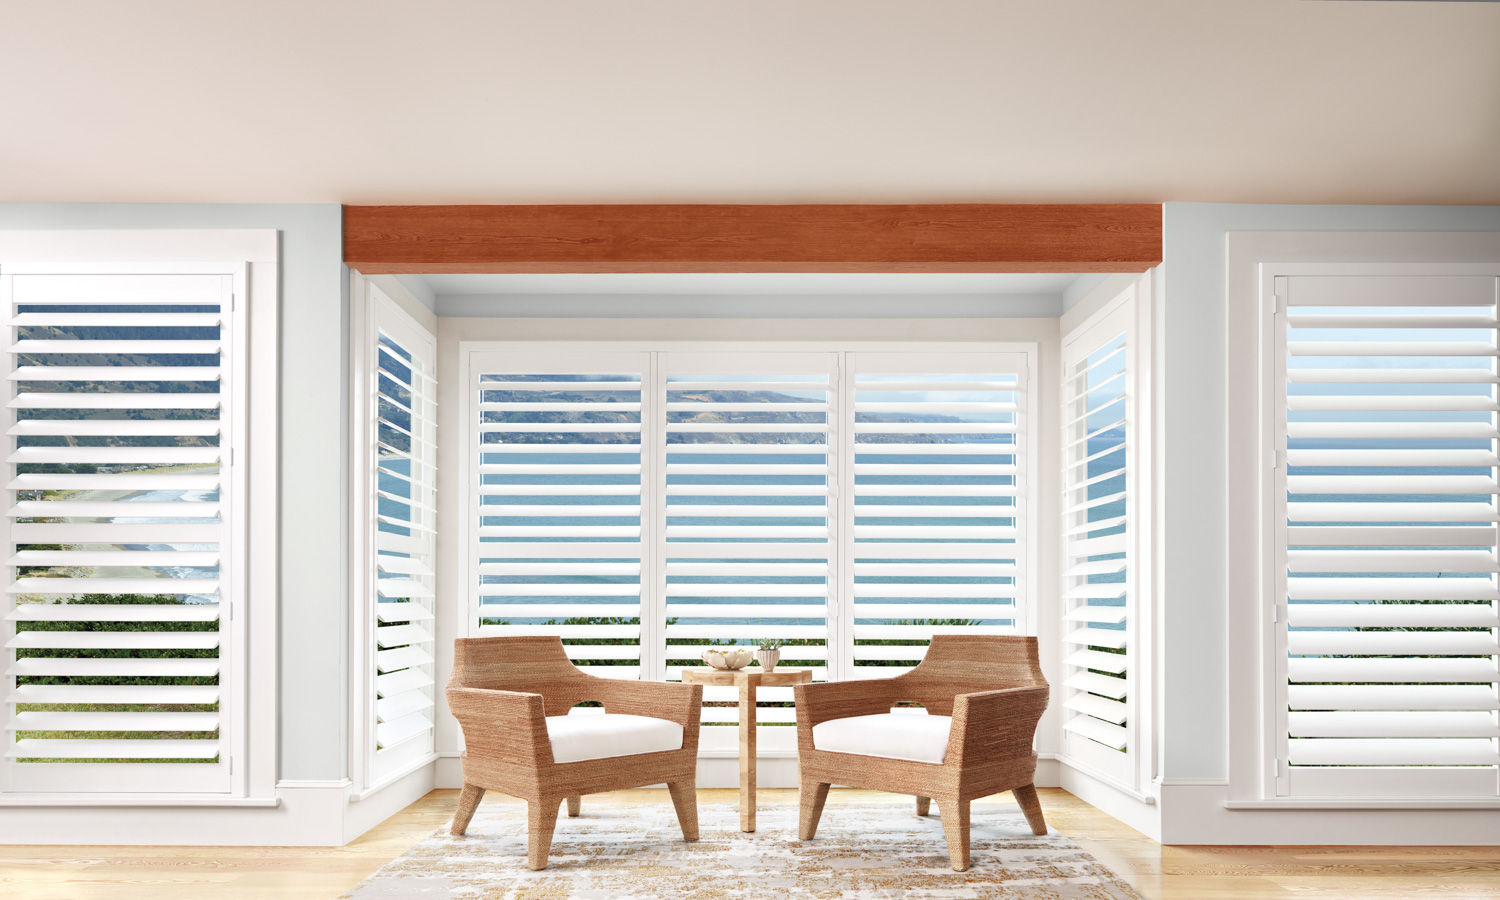 Elegant composite shutters in a stylish sitting area.